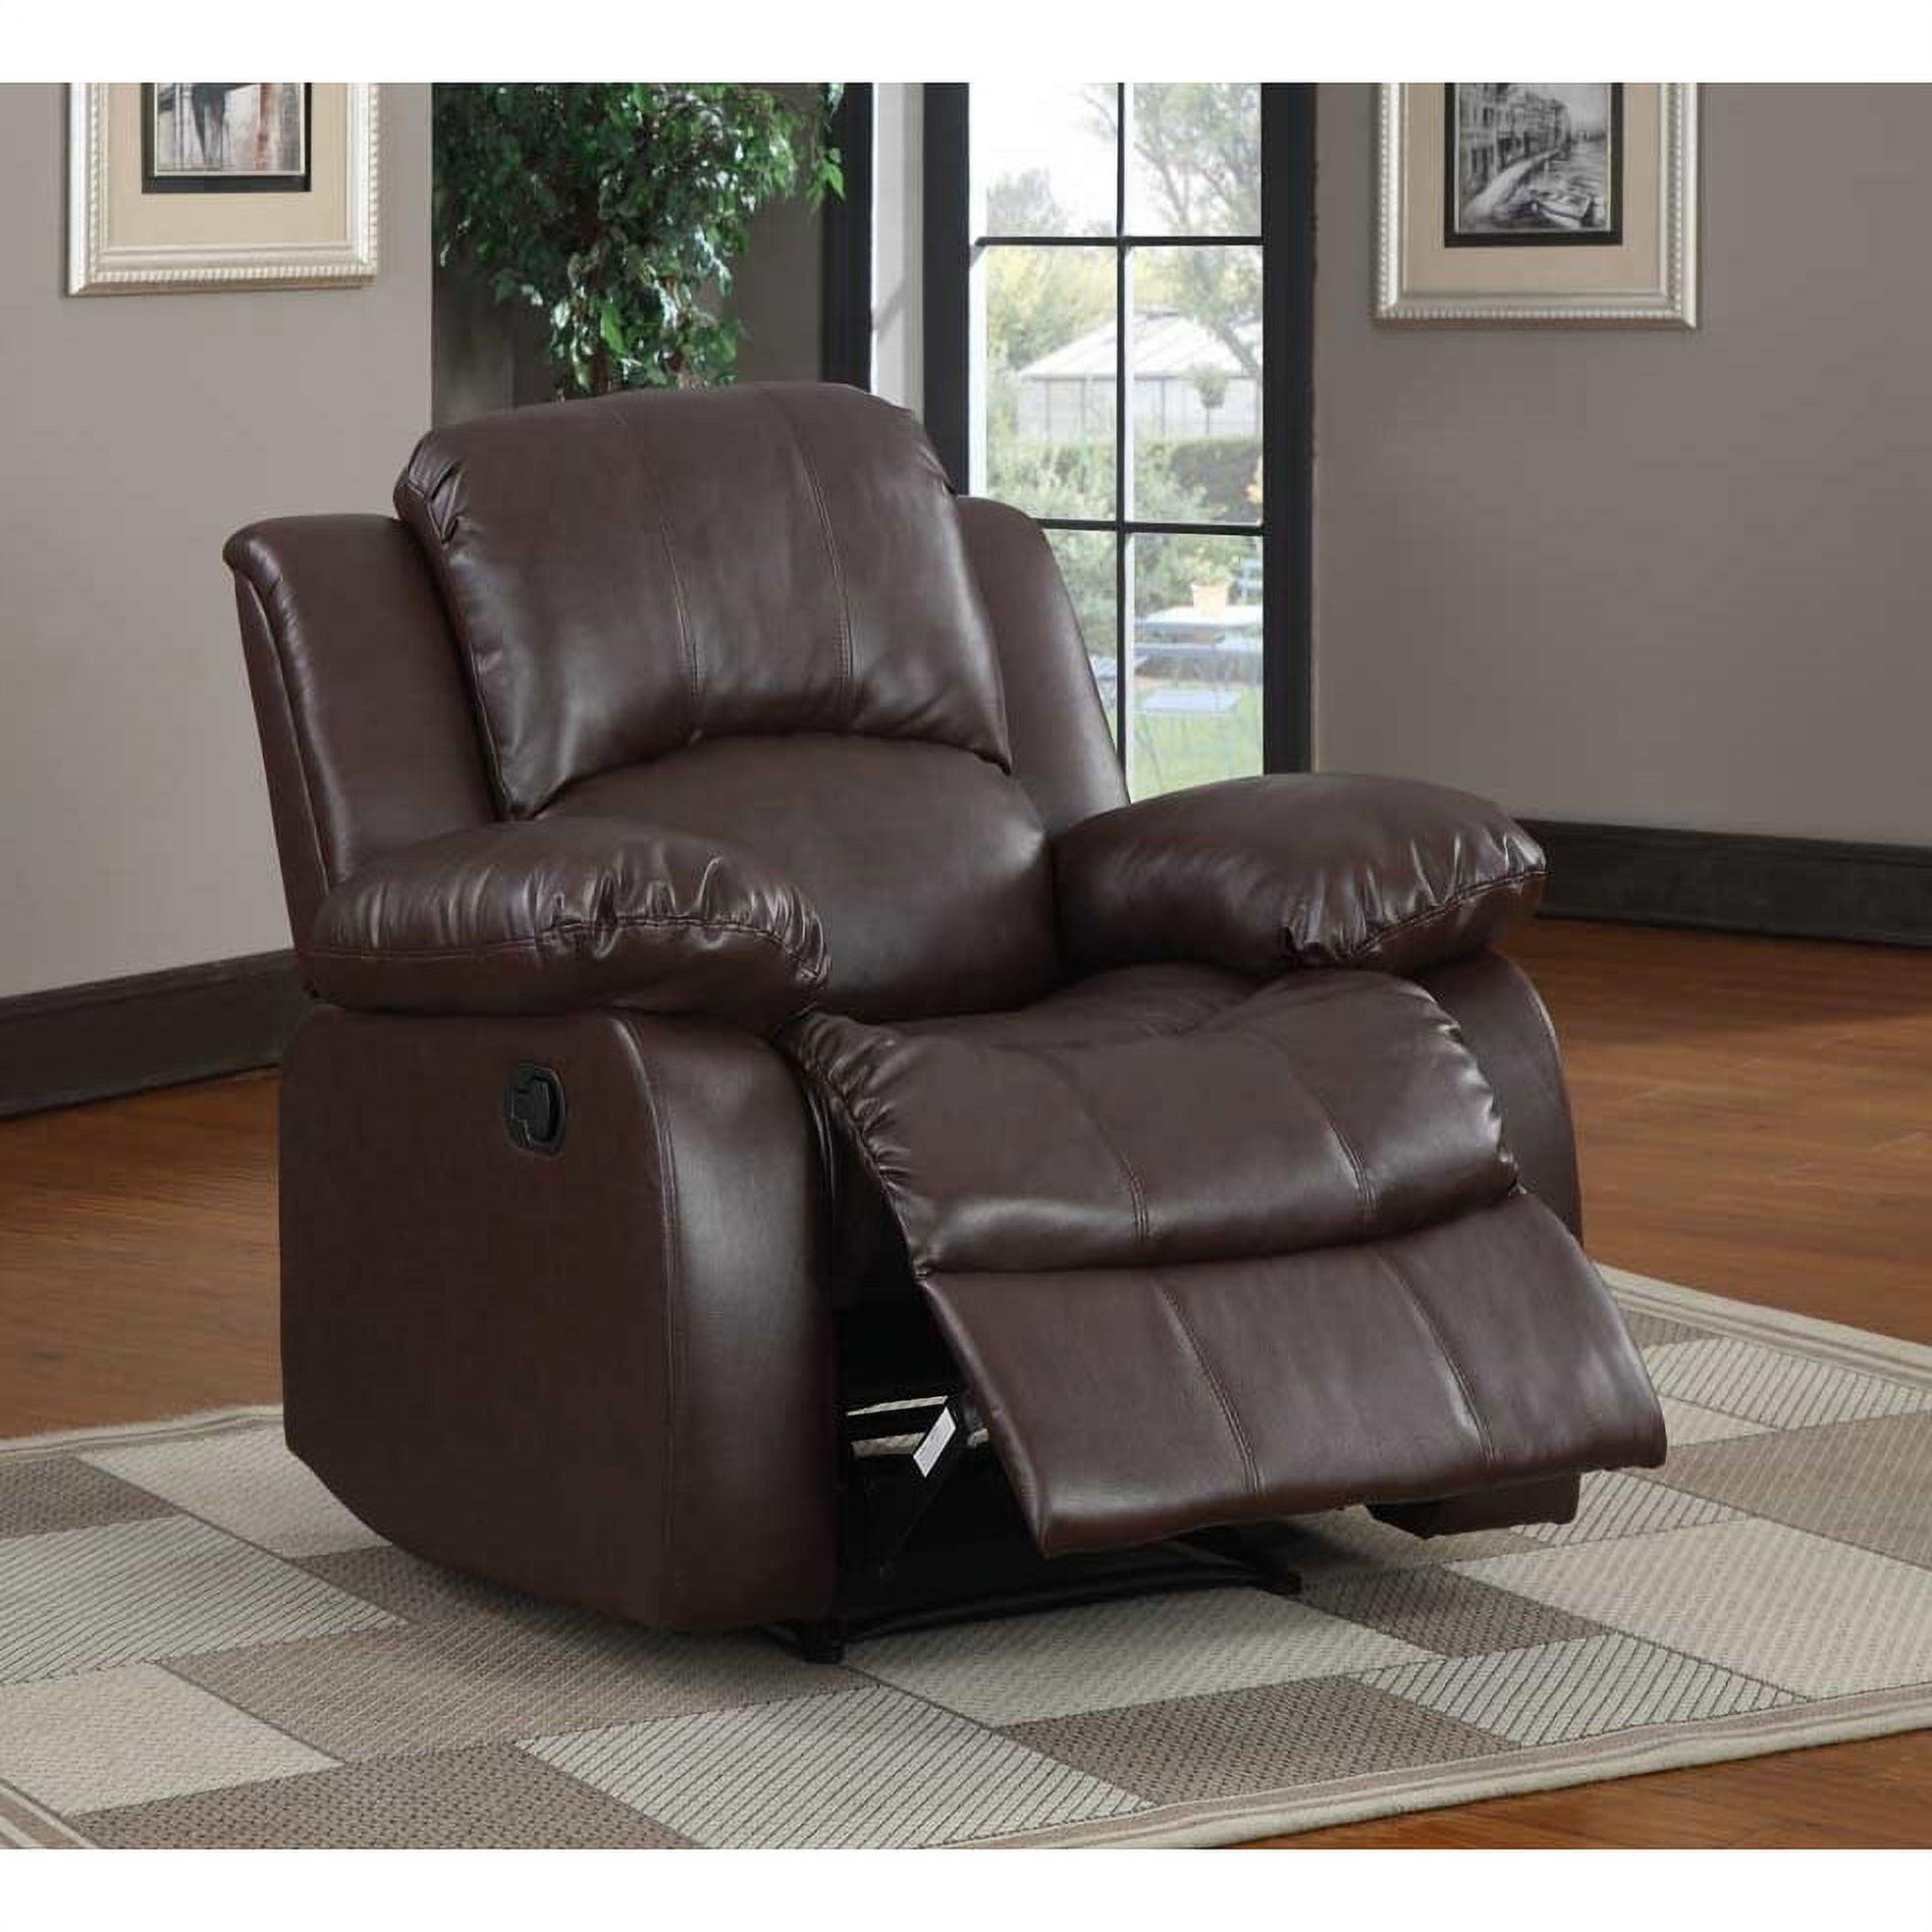 Contemporary Wood & Brown Leather Recliner Chair, 38"